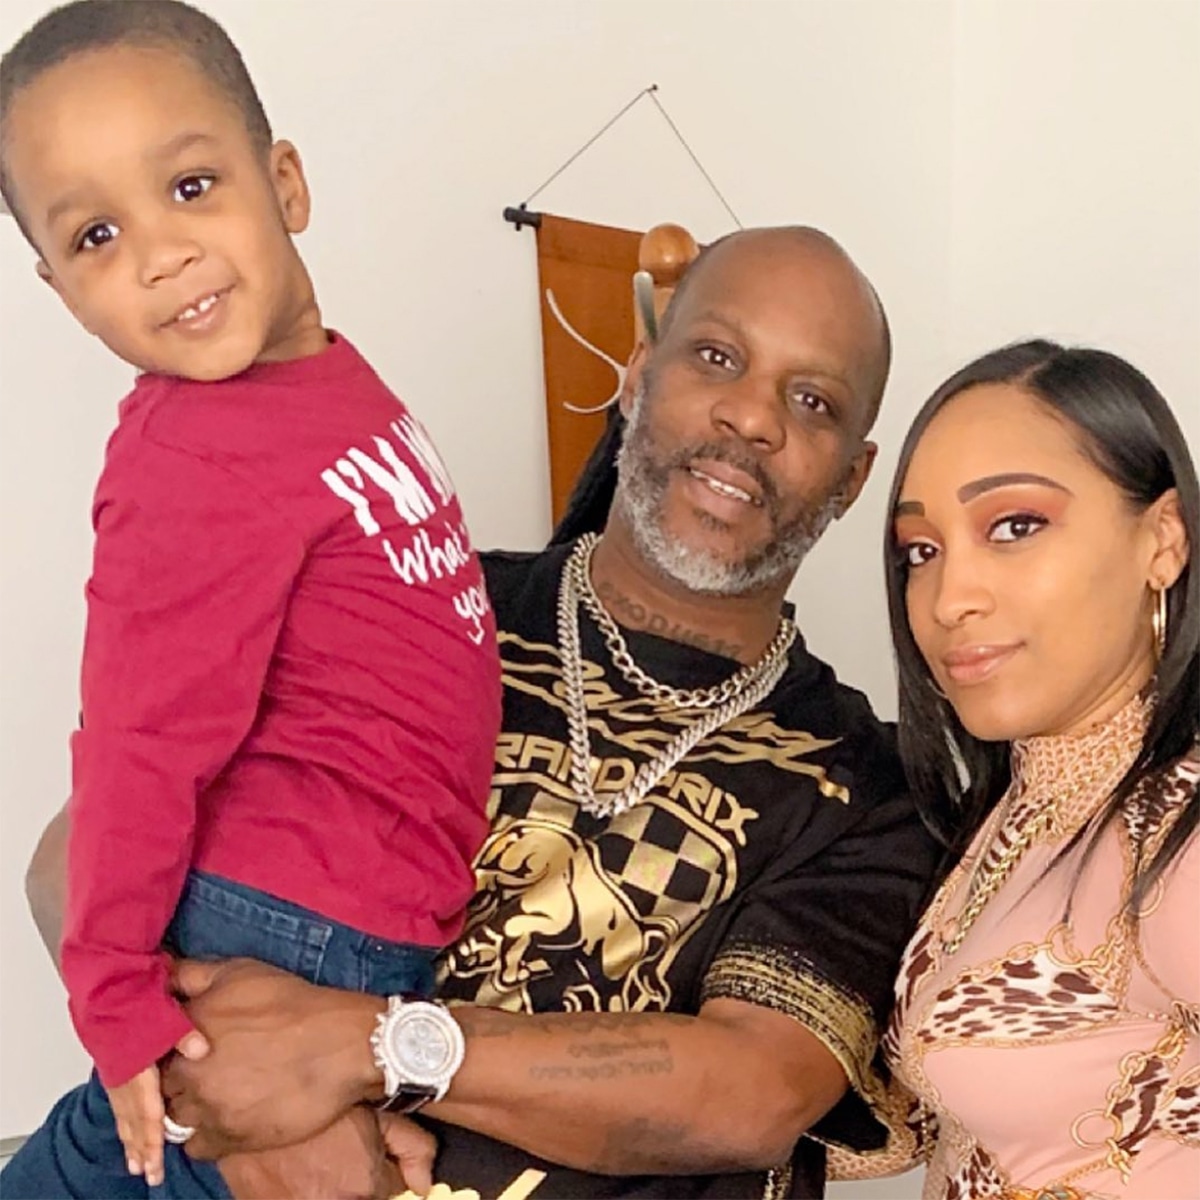 How Many Baby Mamas Does DMX have? The numbers will shock you!